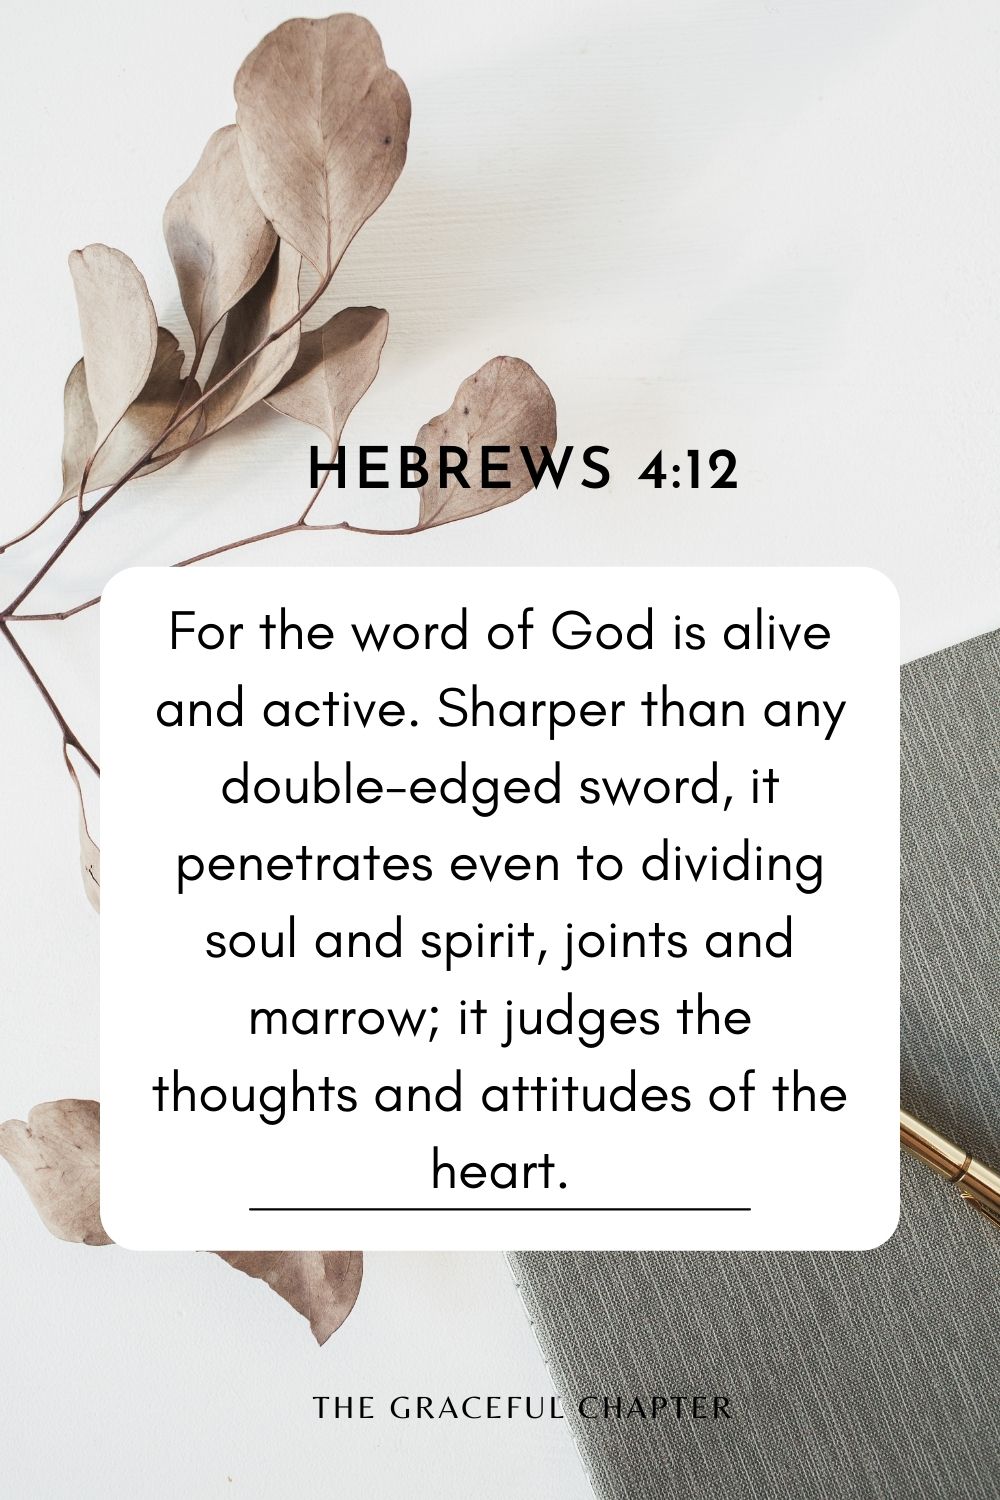 For the word of God is alive and active. Sharper than any double-edged sword, it penetrates even to dividing soul and spirit, joints and marrow; it judges the thoughts and attitudes of the heart. Hebrews 4:12